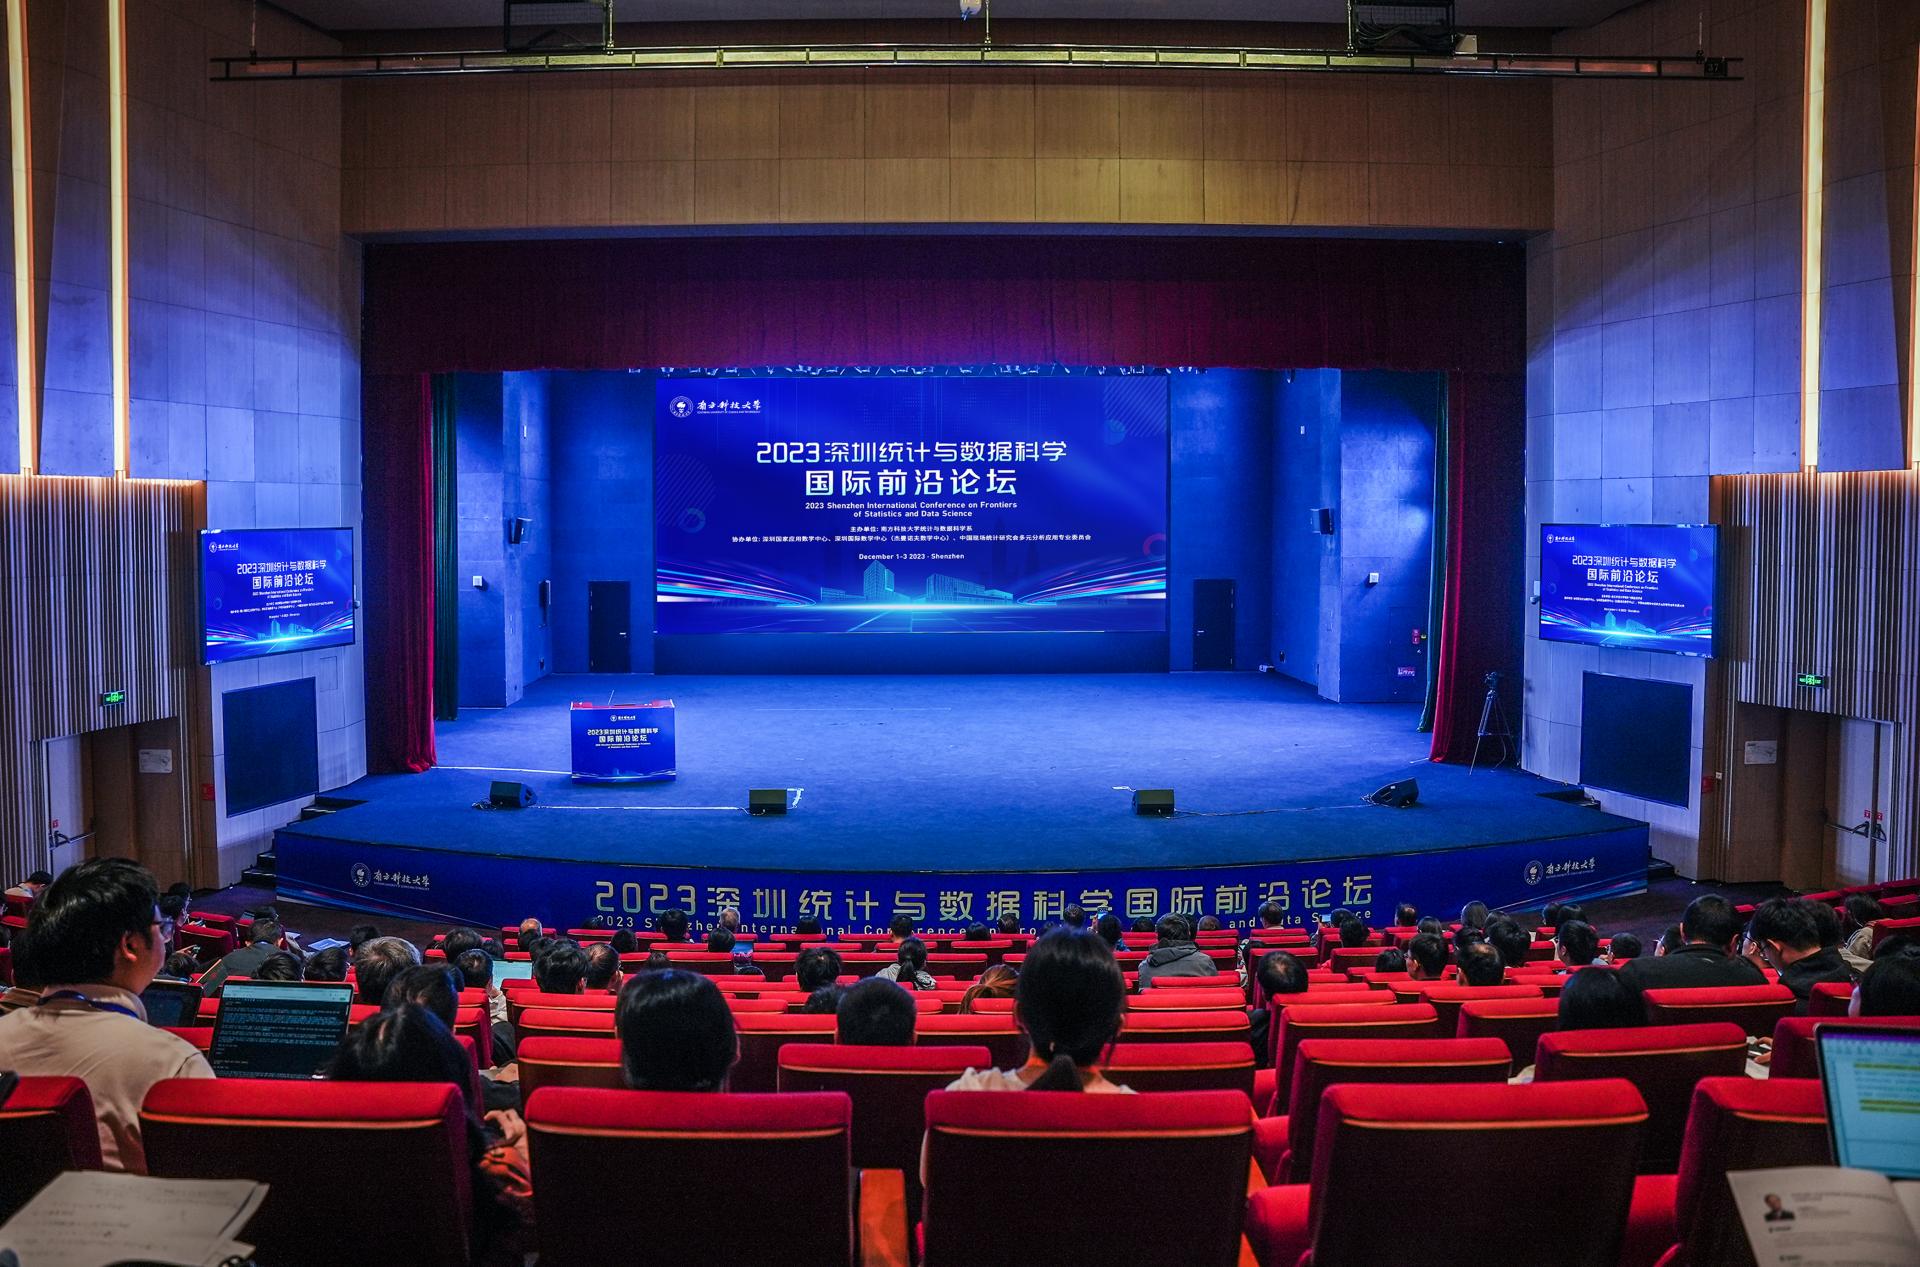 SUSTech hosts 2023 Shenzhen International Conference on Frontiers of Statistics and Data Science